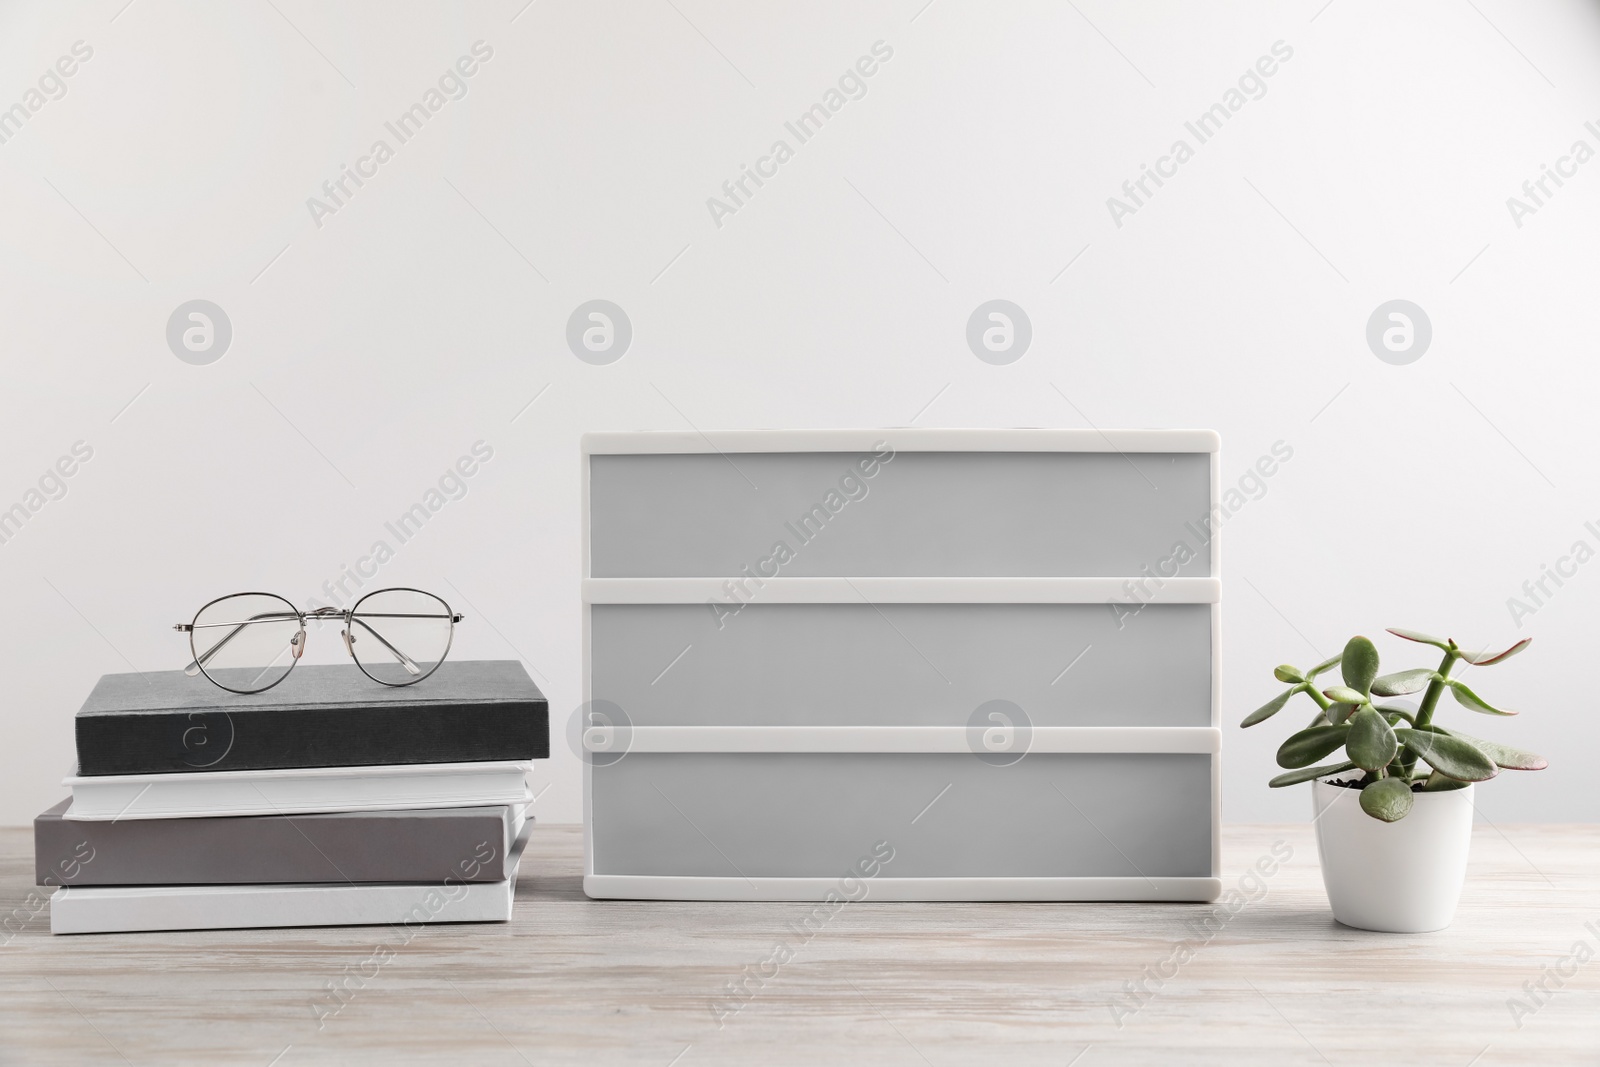 Photo of Blank letter board, books, glasses and beautiful houseplant on wooden table. Mockup for design